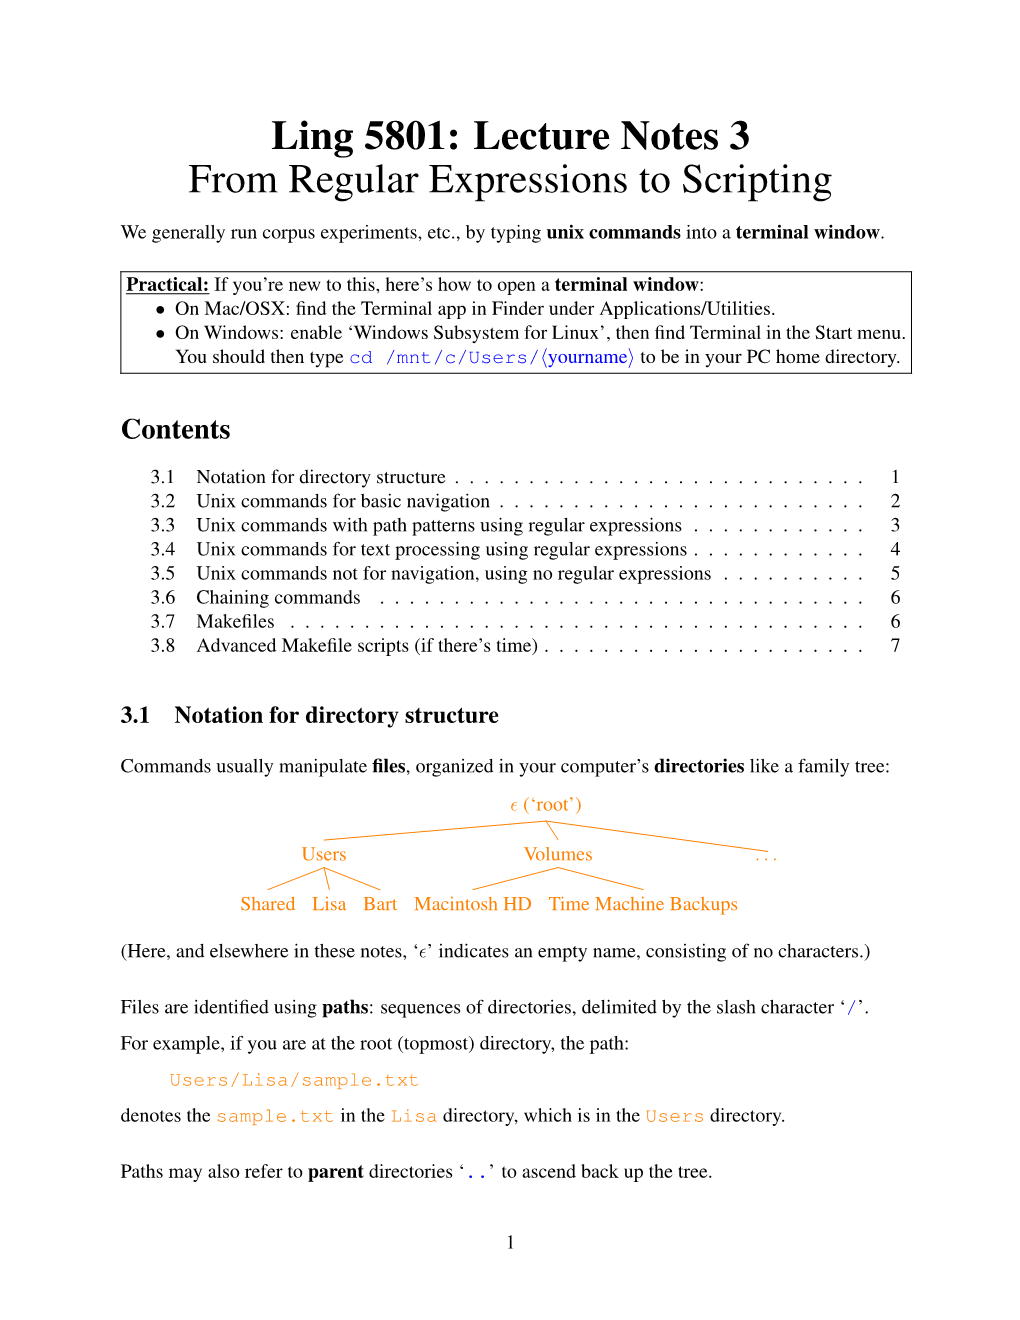 Ling 5801: Lecture Notes 3 from Regular Expressions to Scripting